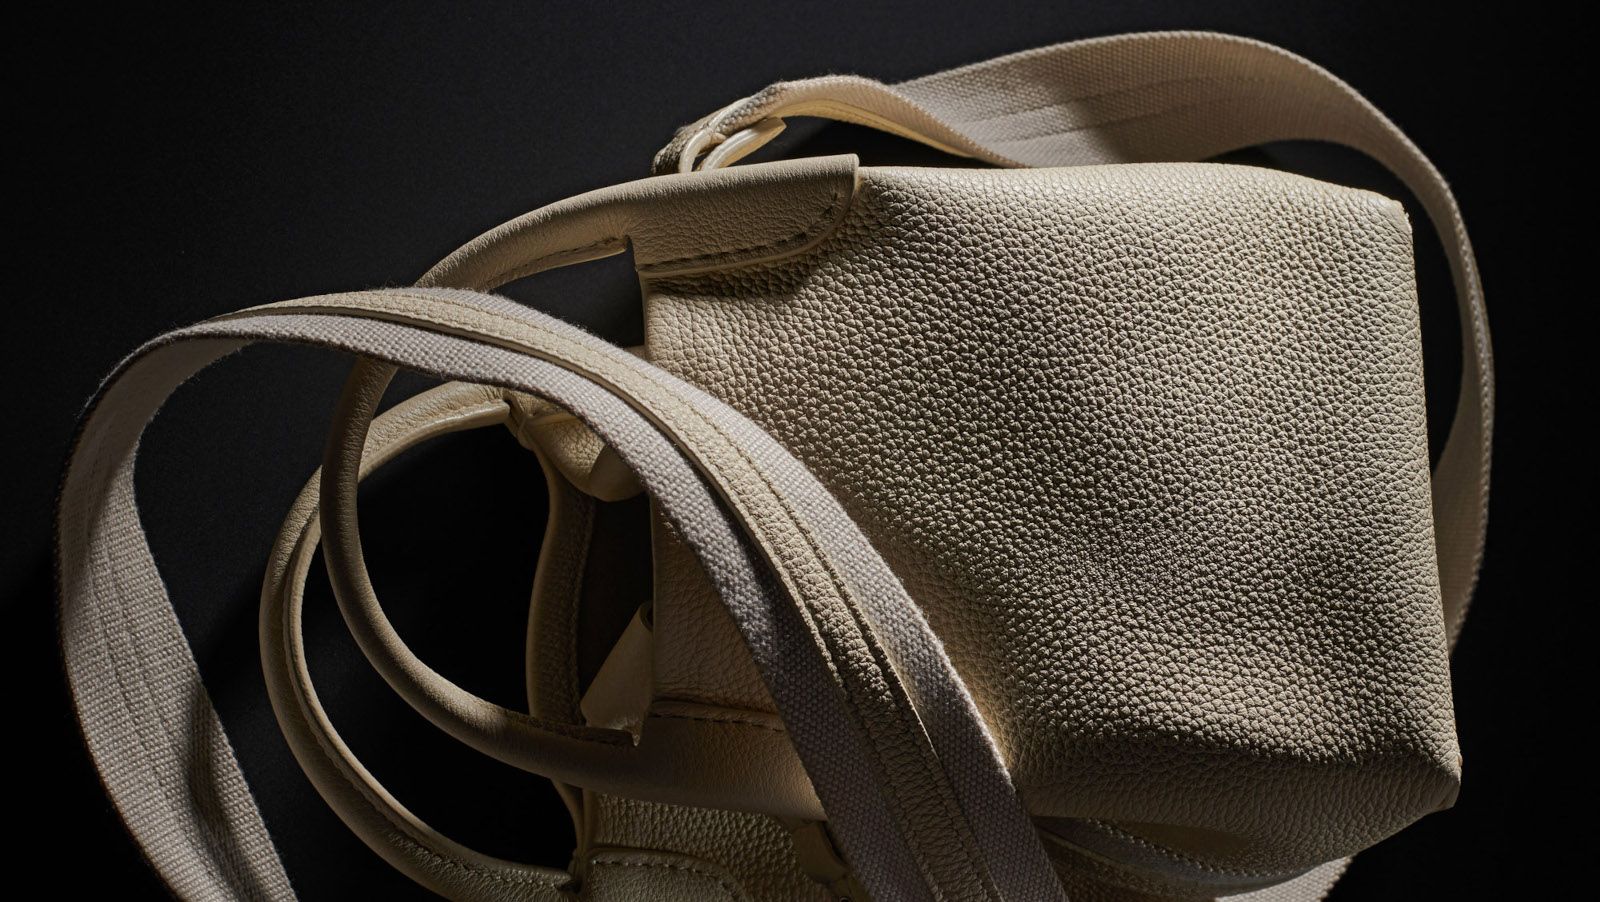 Loro Piana Presents the Bale Bag, a New Sinuous, Casual and